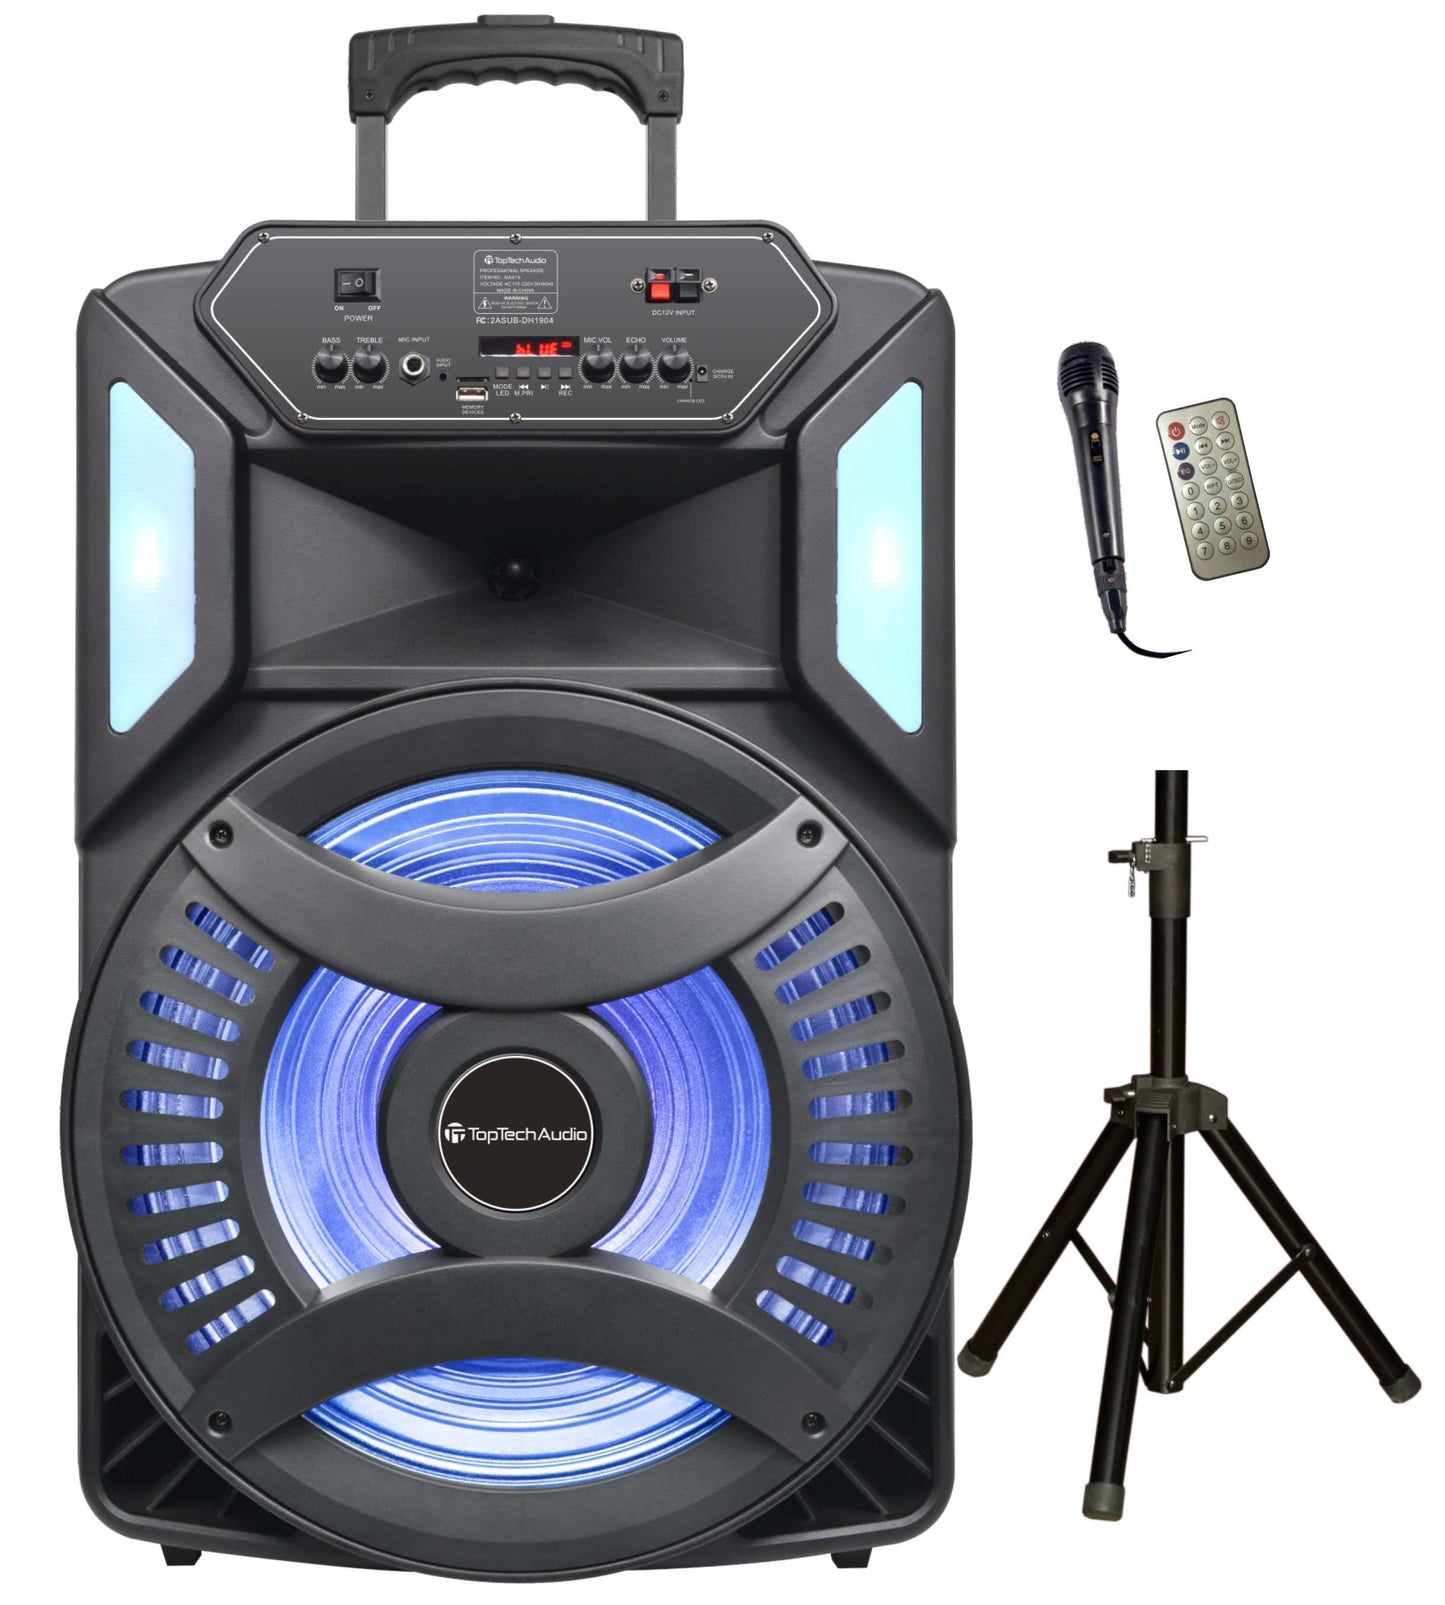 Fully Amplified Portable 6000 Watts Peak Power 15” Speaker with led light